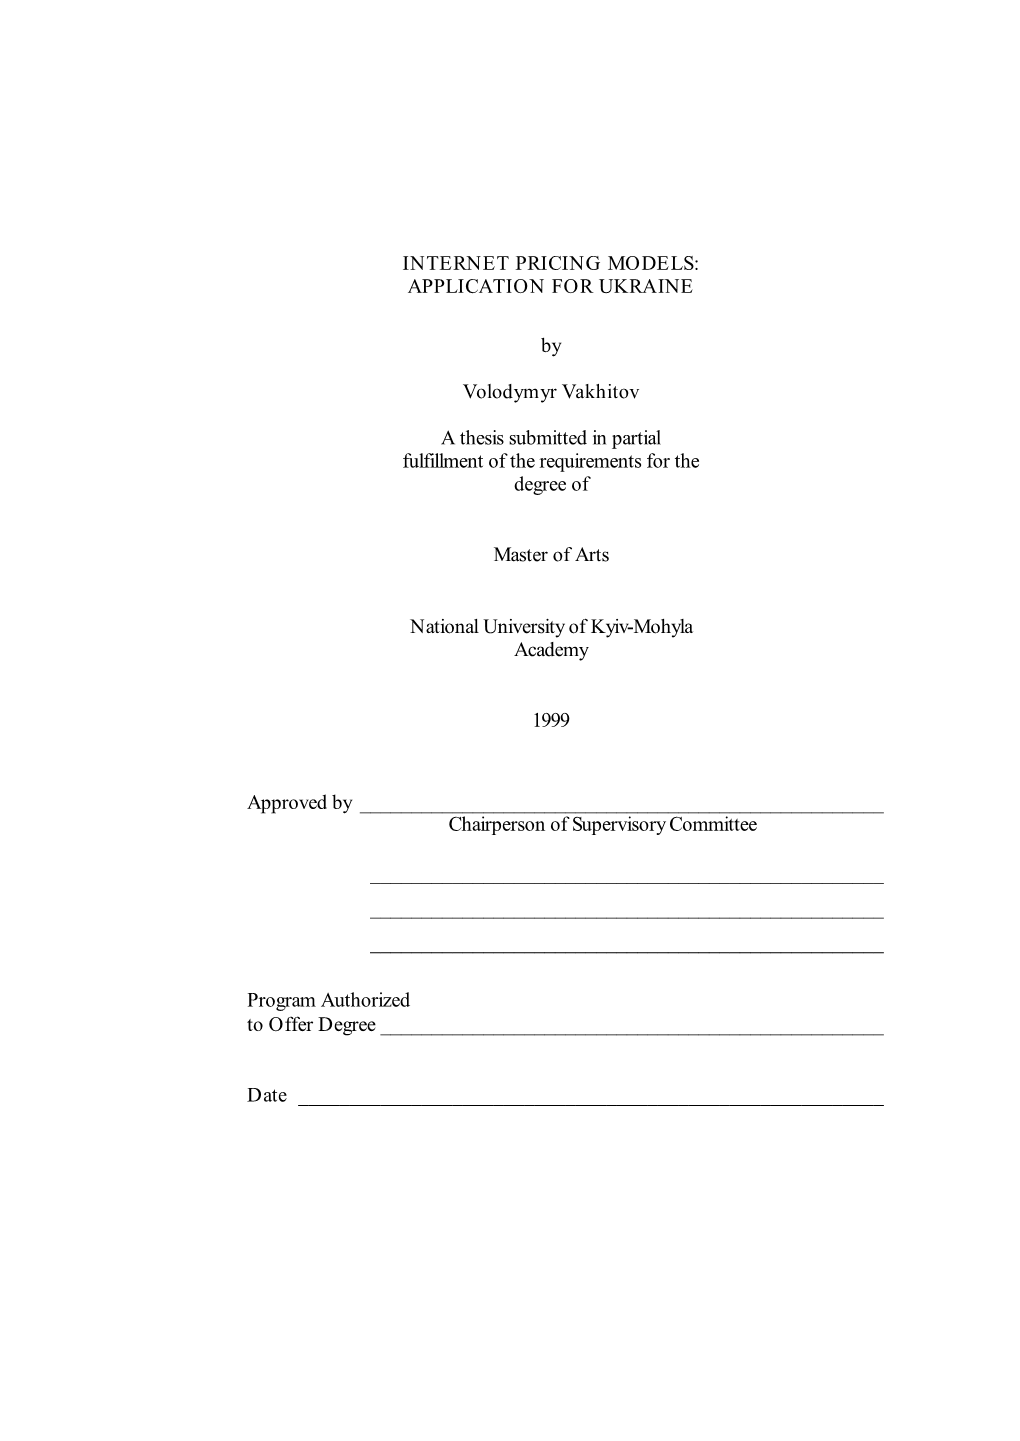 INTERNET PRICING MODELS: APPLICATION for UKRAINE by Volodymyr Vakhitov a Thesis Submitted in Partial Fulfillment of the Requirem